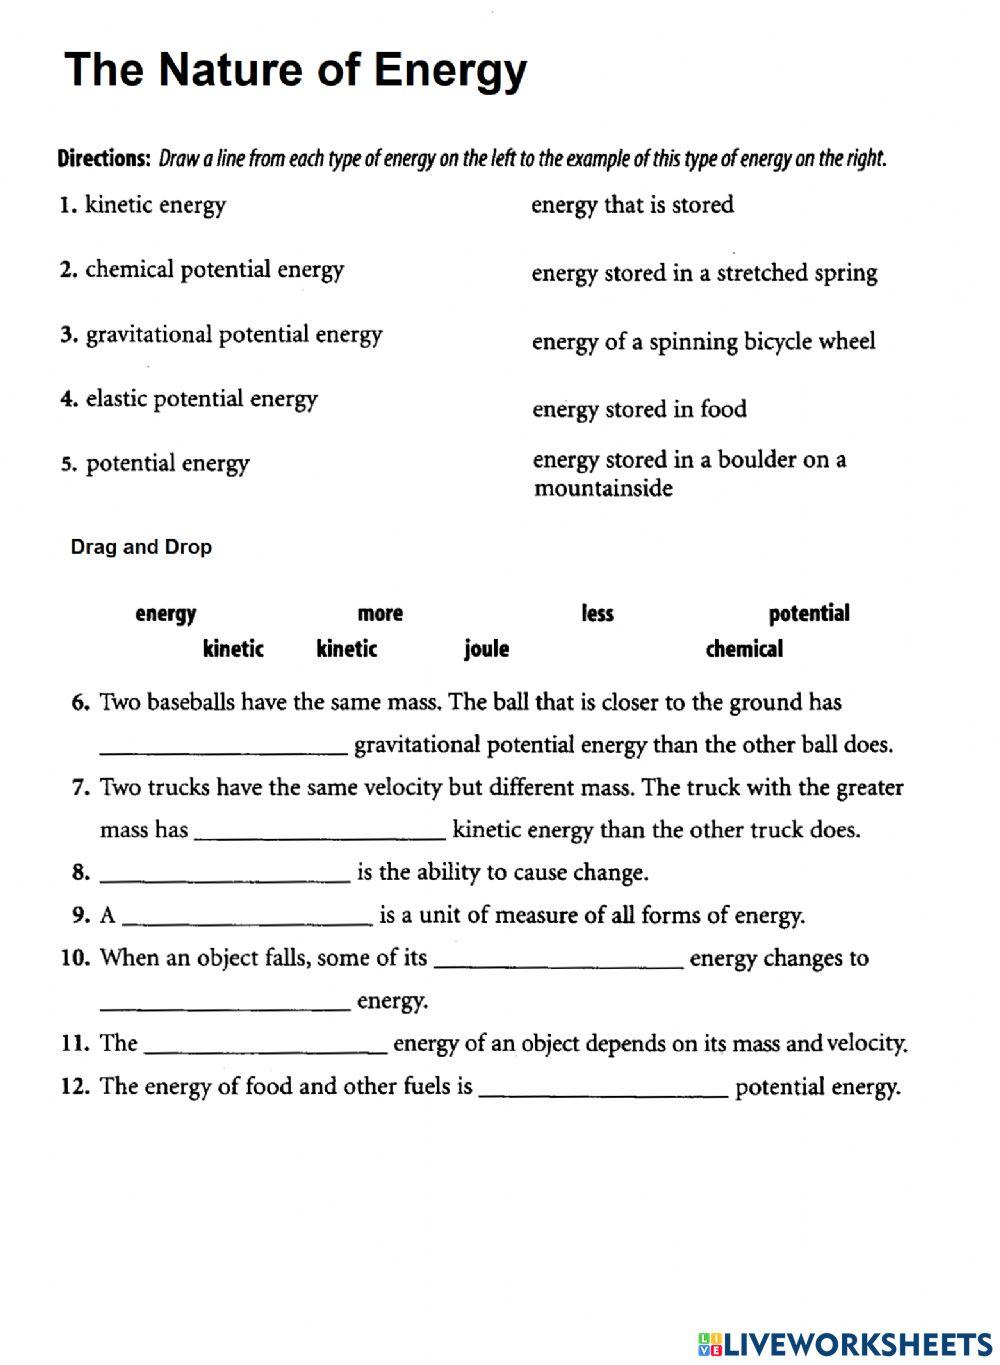 PS-13-The Nature of Energy